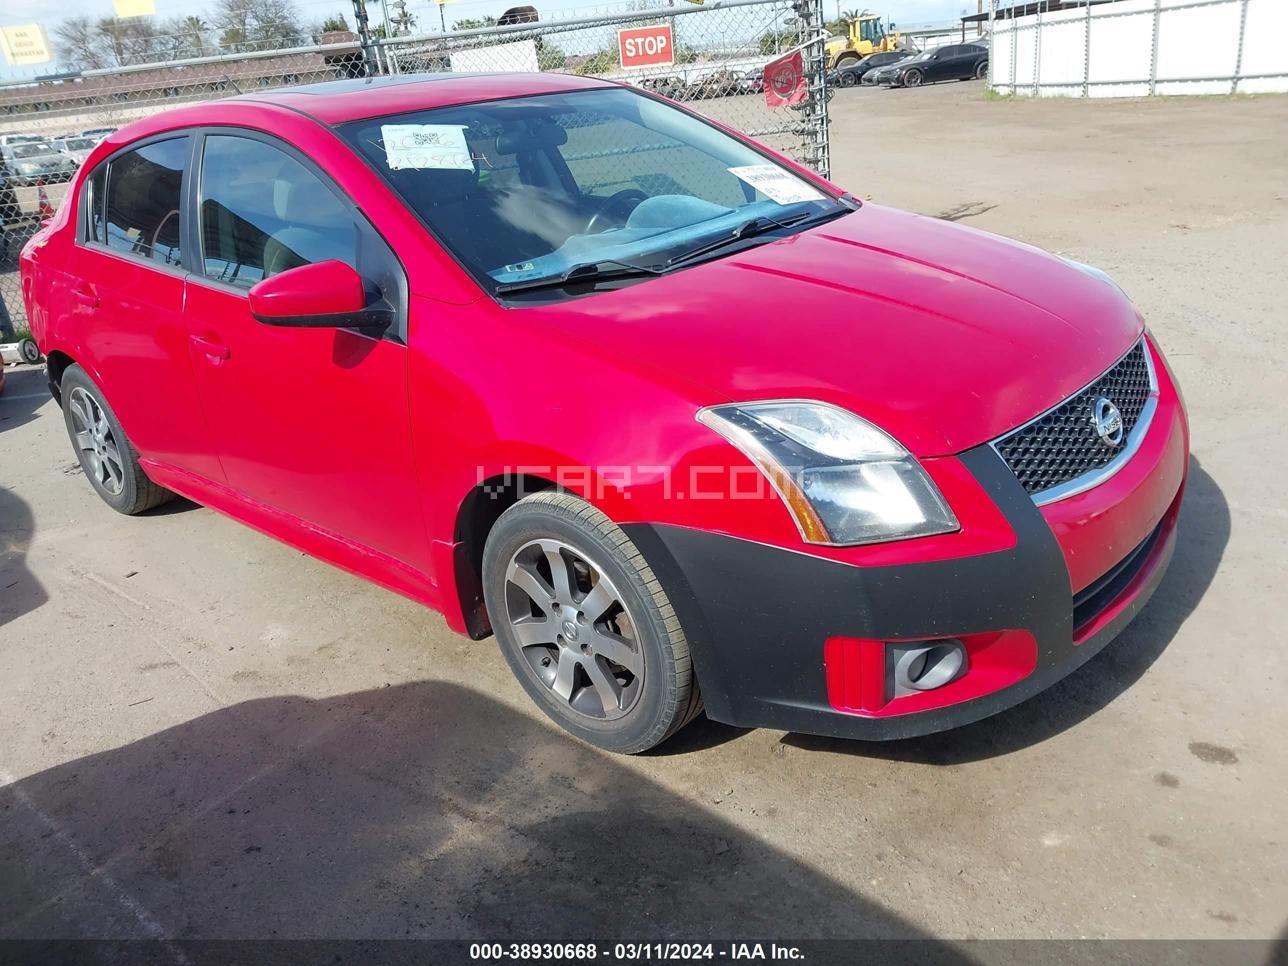 VIN: 3N1AB6APXCL706478 - nissan sentra